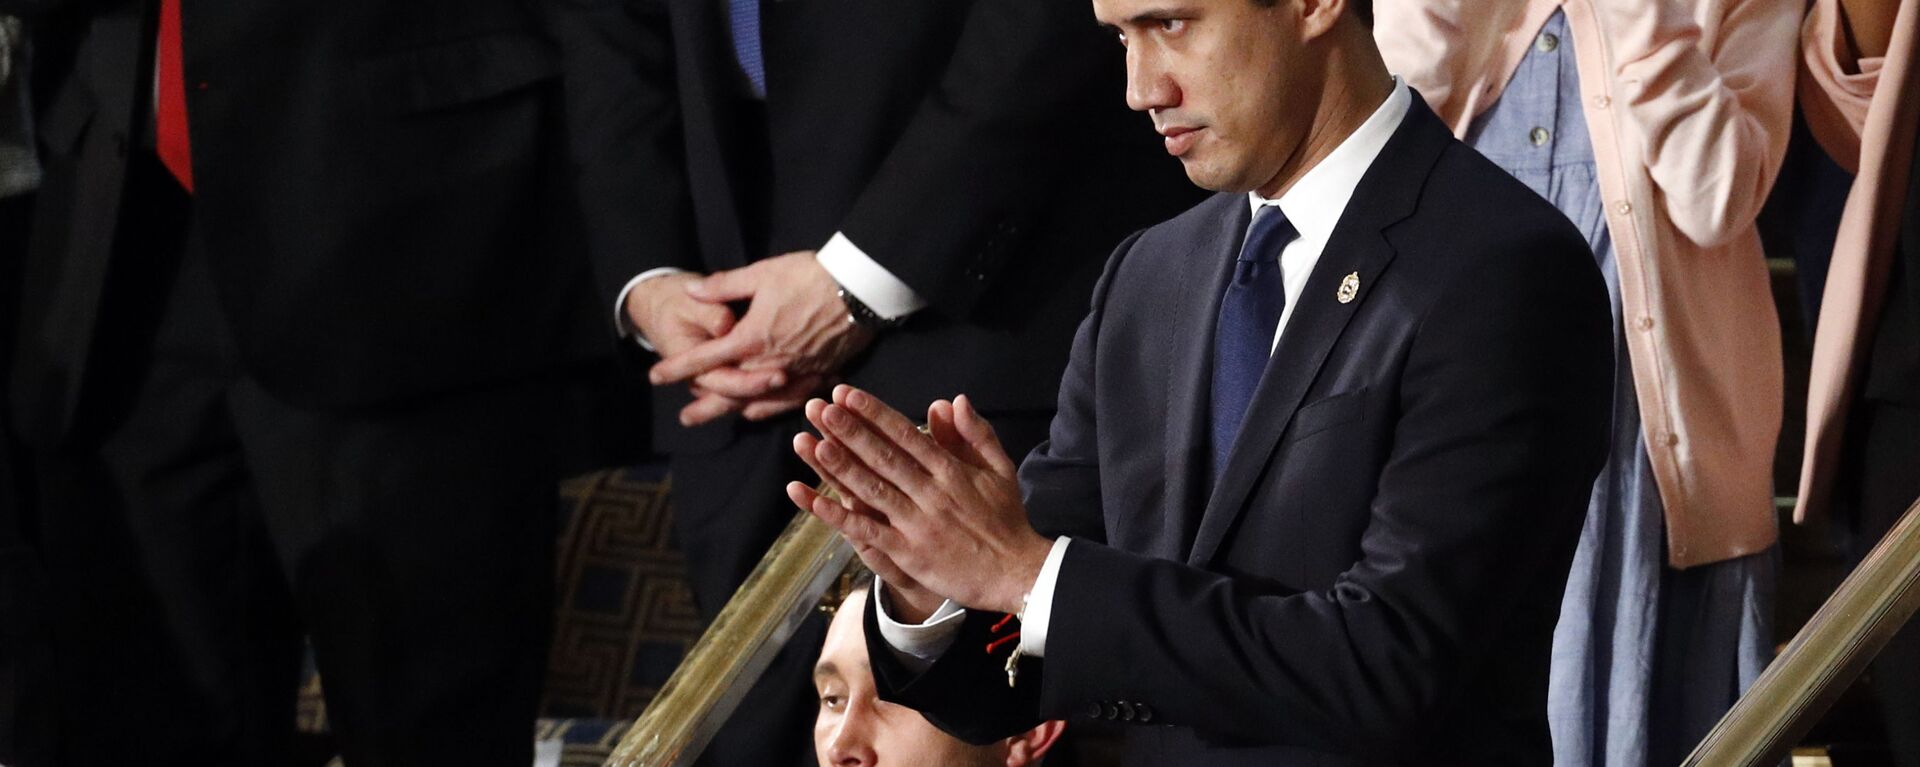 Venezuelan opposition leader Juan Guaido reacts as President Donald Trump delivers his State of the Union address to a joint session of Congress on Capitol Hill in Washington, Tuesday, Feb. 4, 2020. (AP Photo/Patrick Semansky) (AP Photo/Patrick Semansky) - Sputnik International, 1920, 25.02.2020